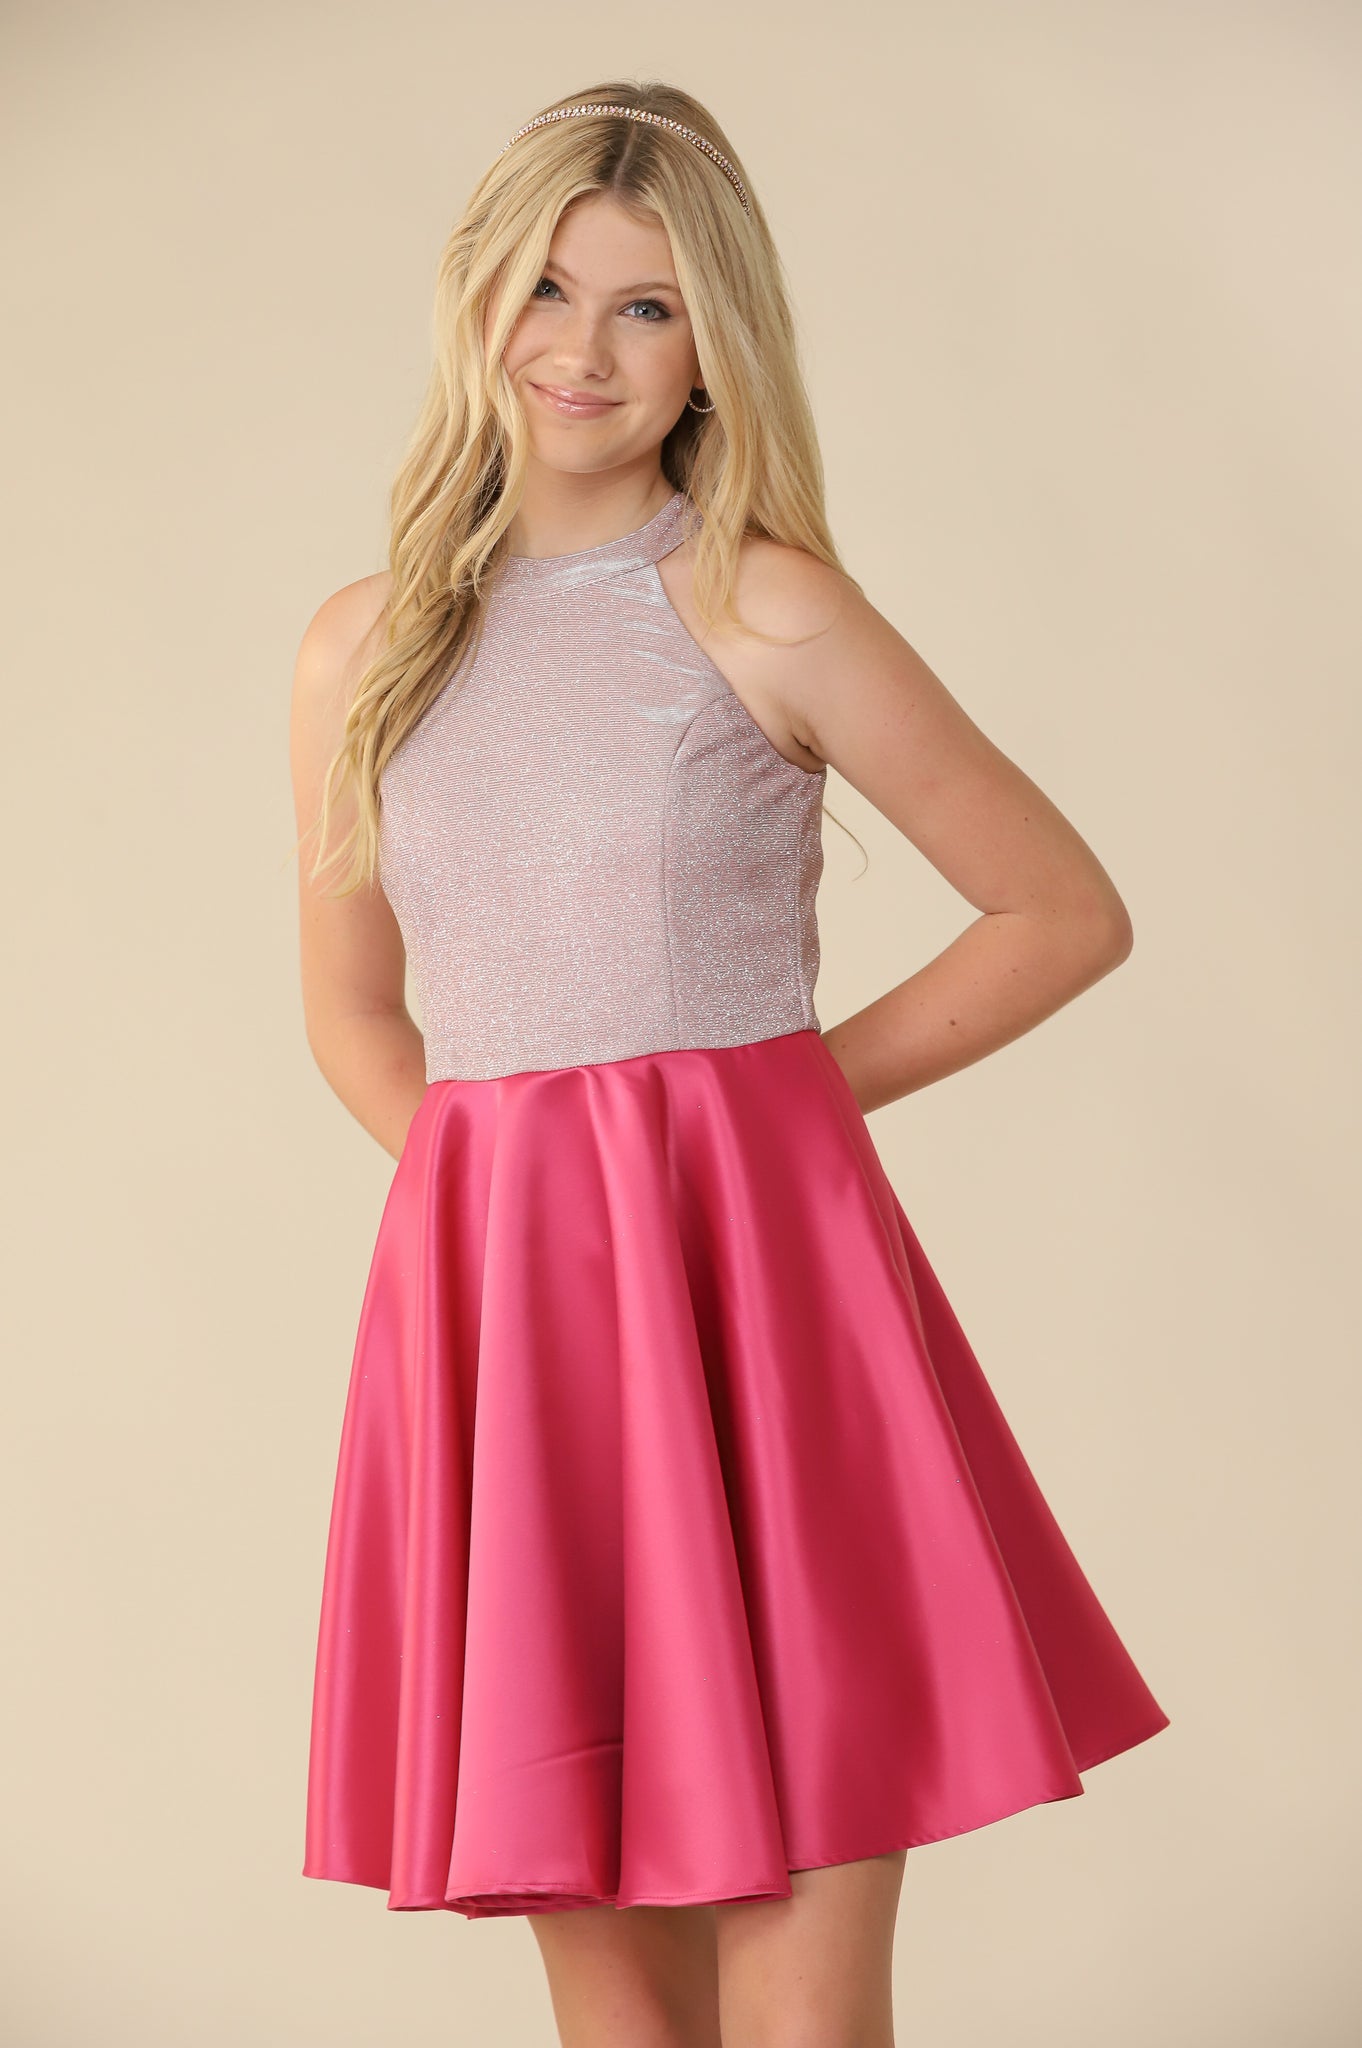 Halter style fit and flare dress with a stretchy, glitter bodice and non-stretch satin skirt in fuchsia pink. 